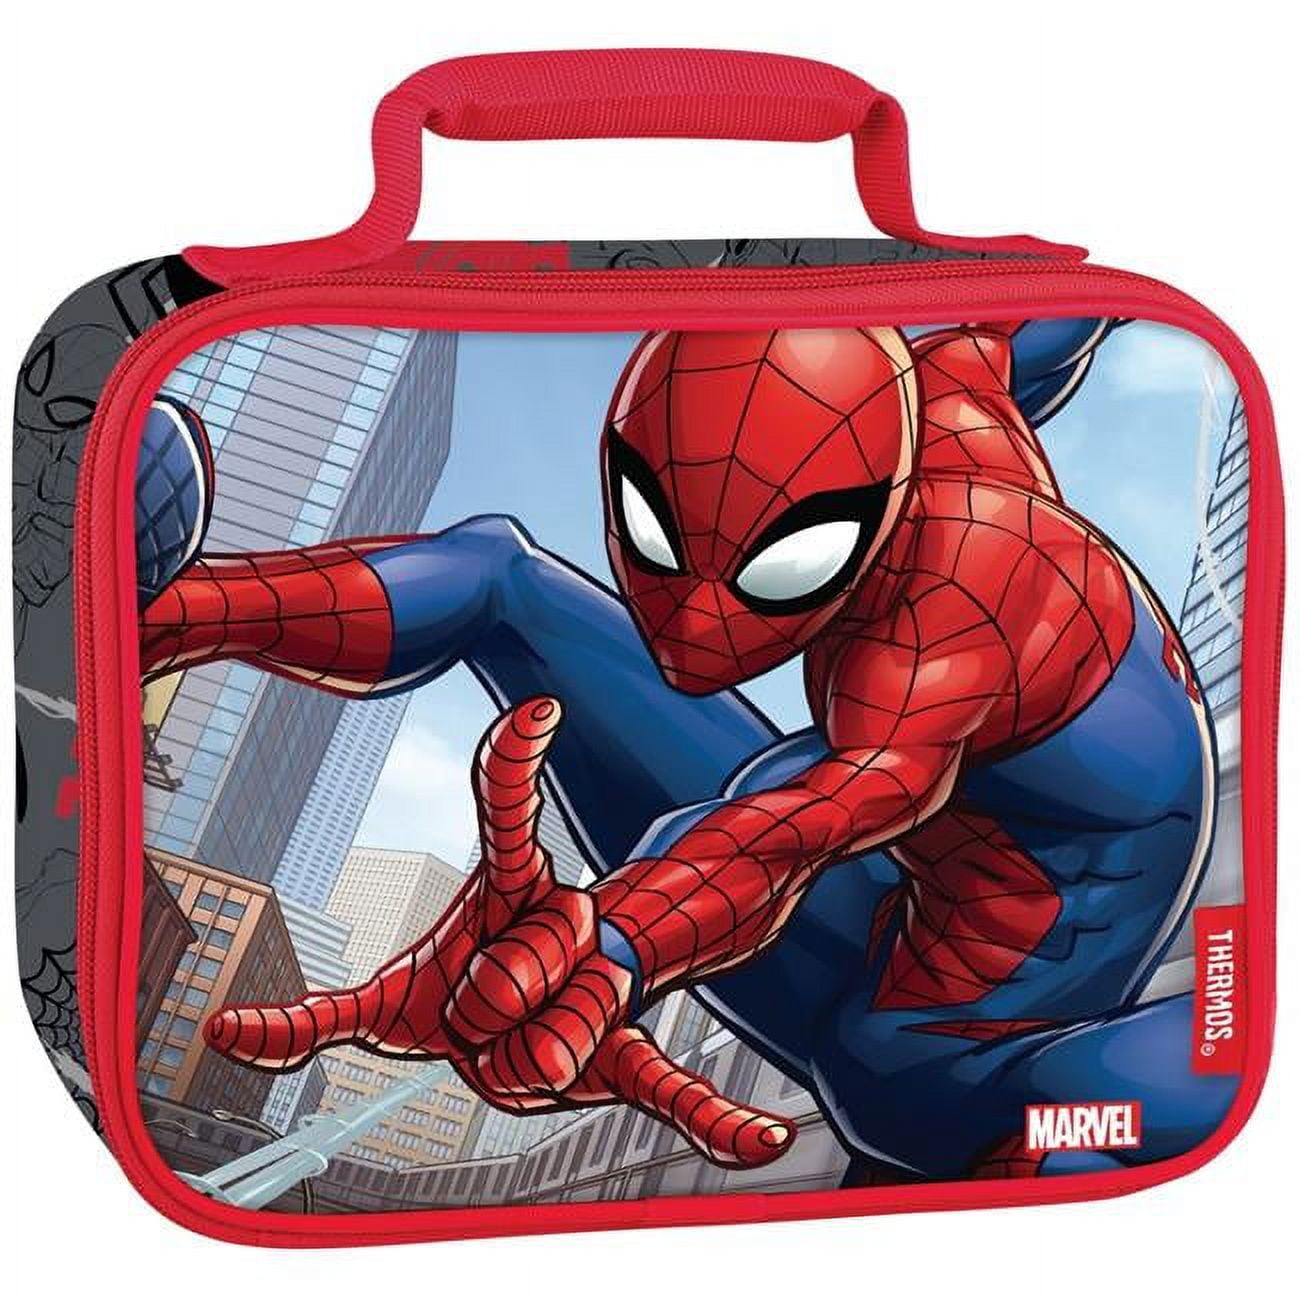 Thermos Kids Insulated Dual Compartment Lunch Bag, Spiderman 